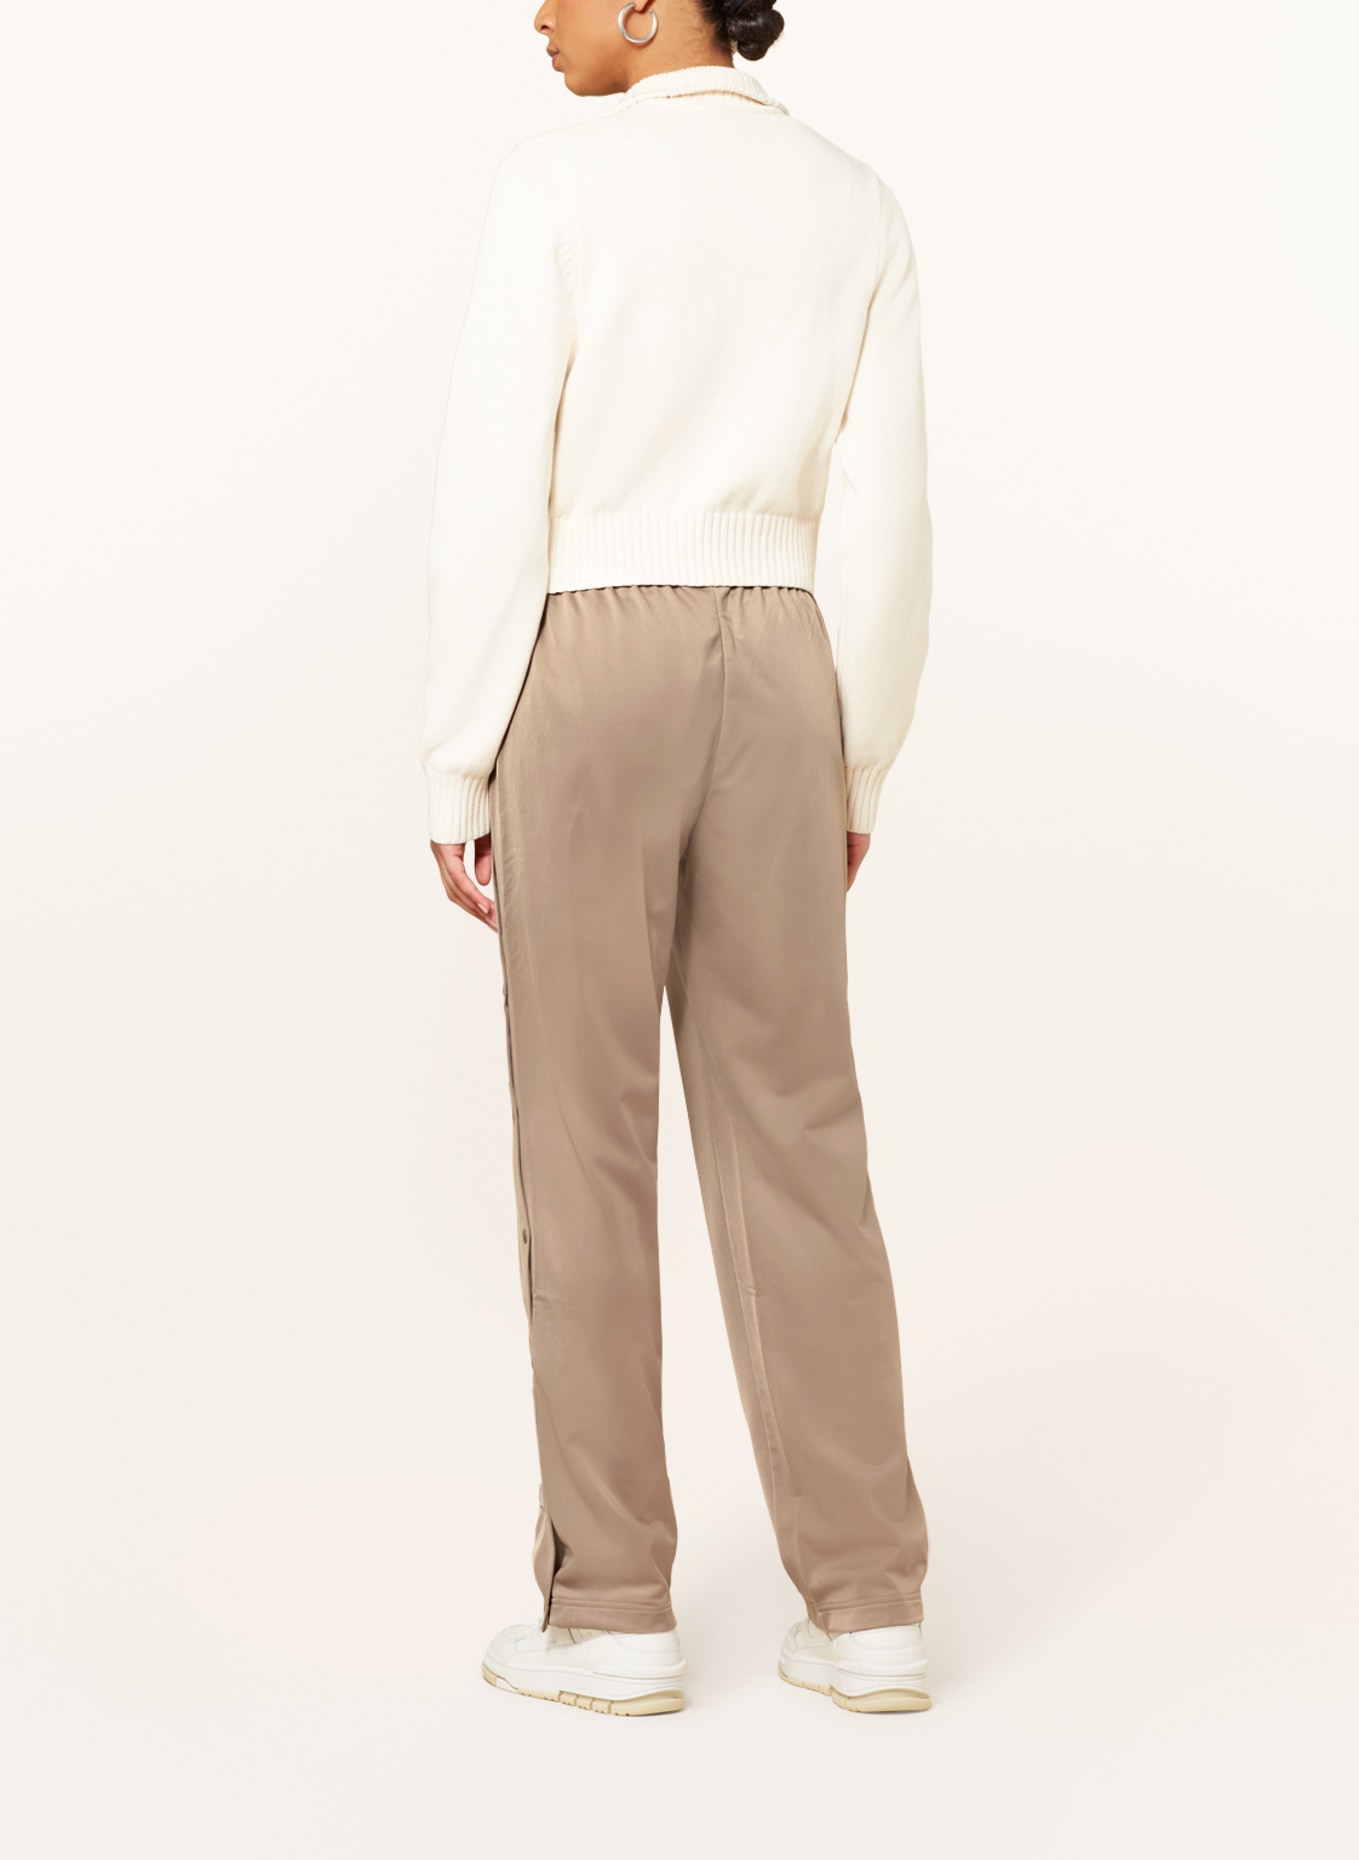 adidas Originals Trousers ADIBREAK in jogger style, Color: TAUPE (Image 3)